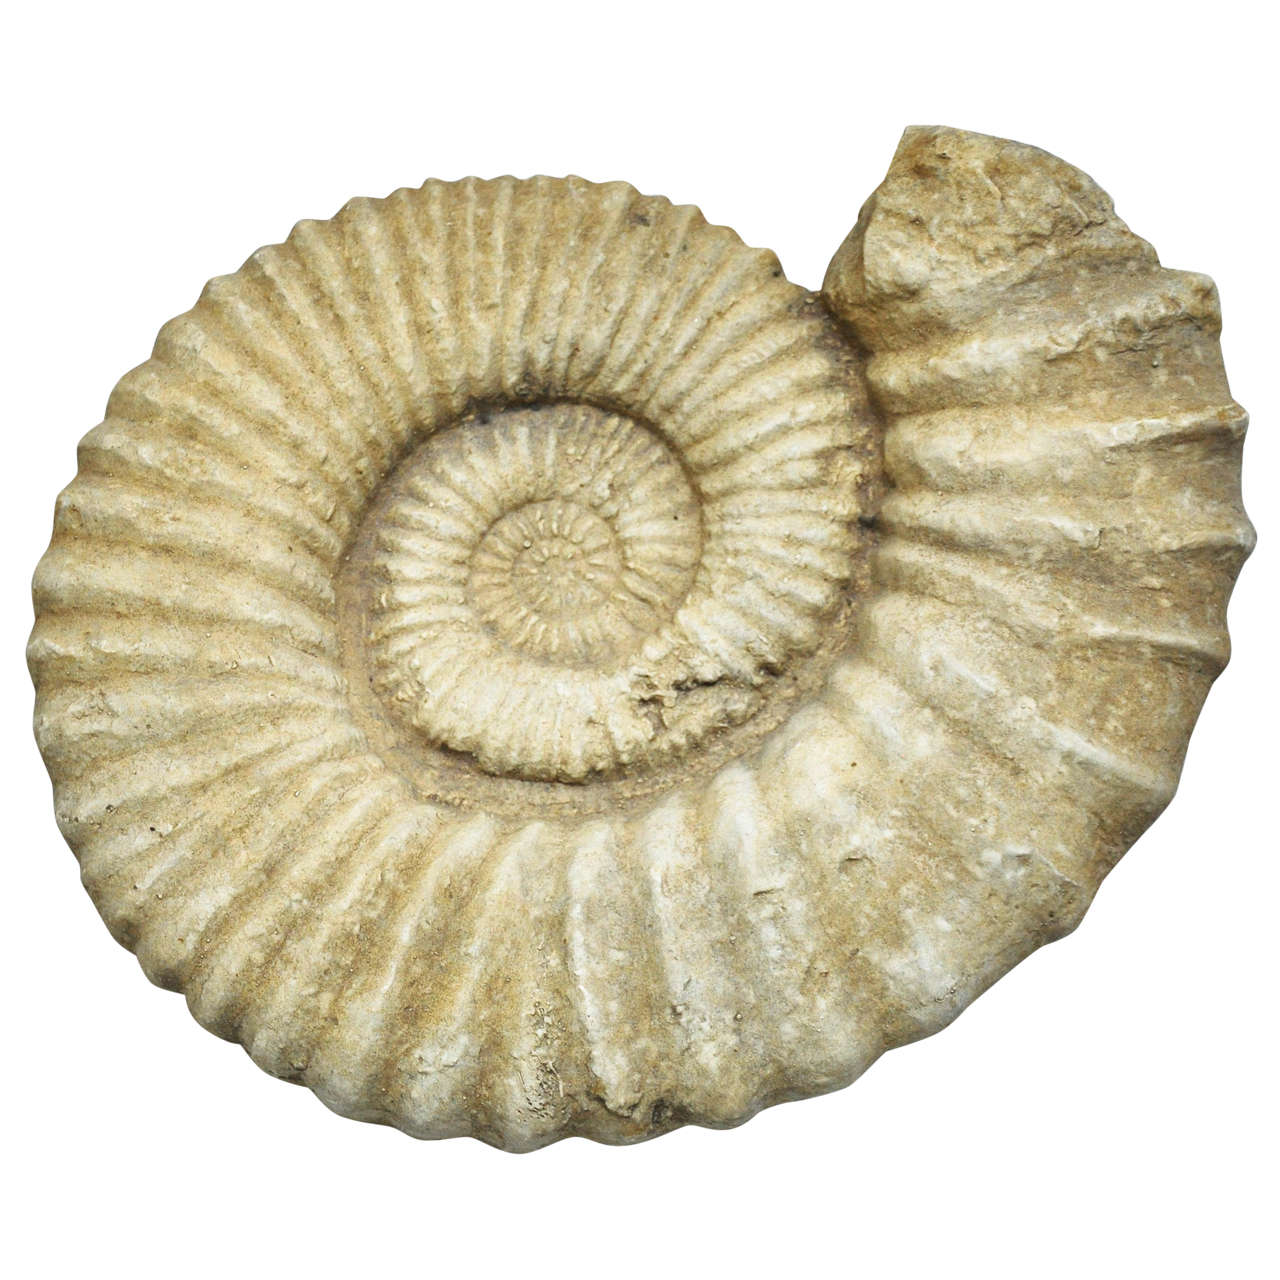 Calcified / Fossilized Ammonite Spiral Shell